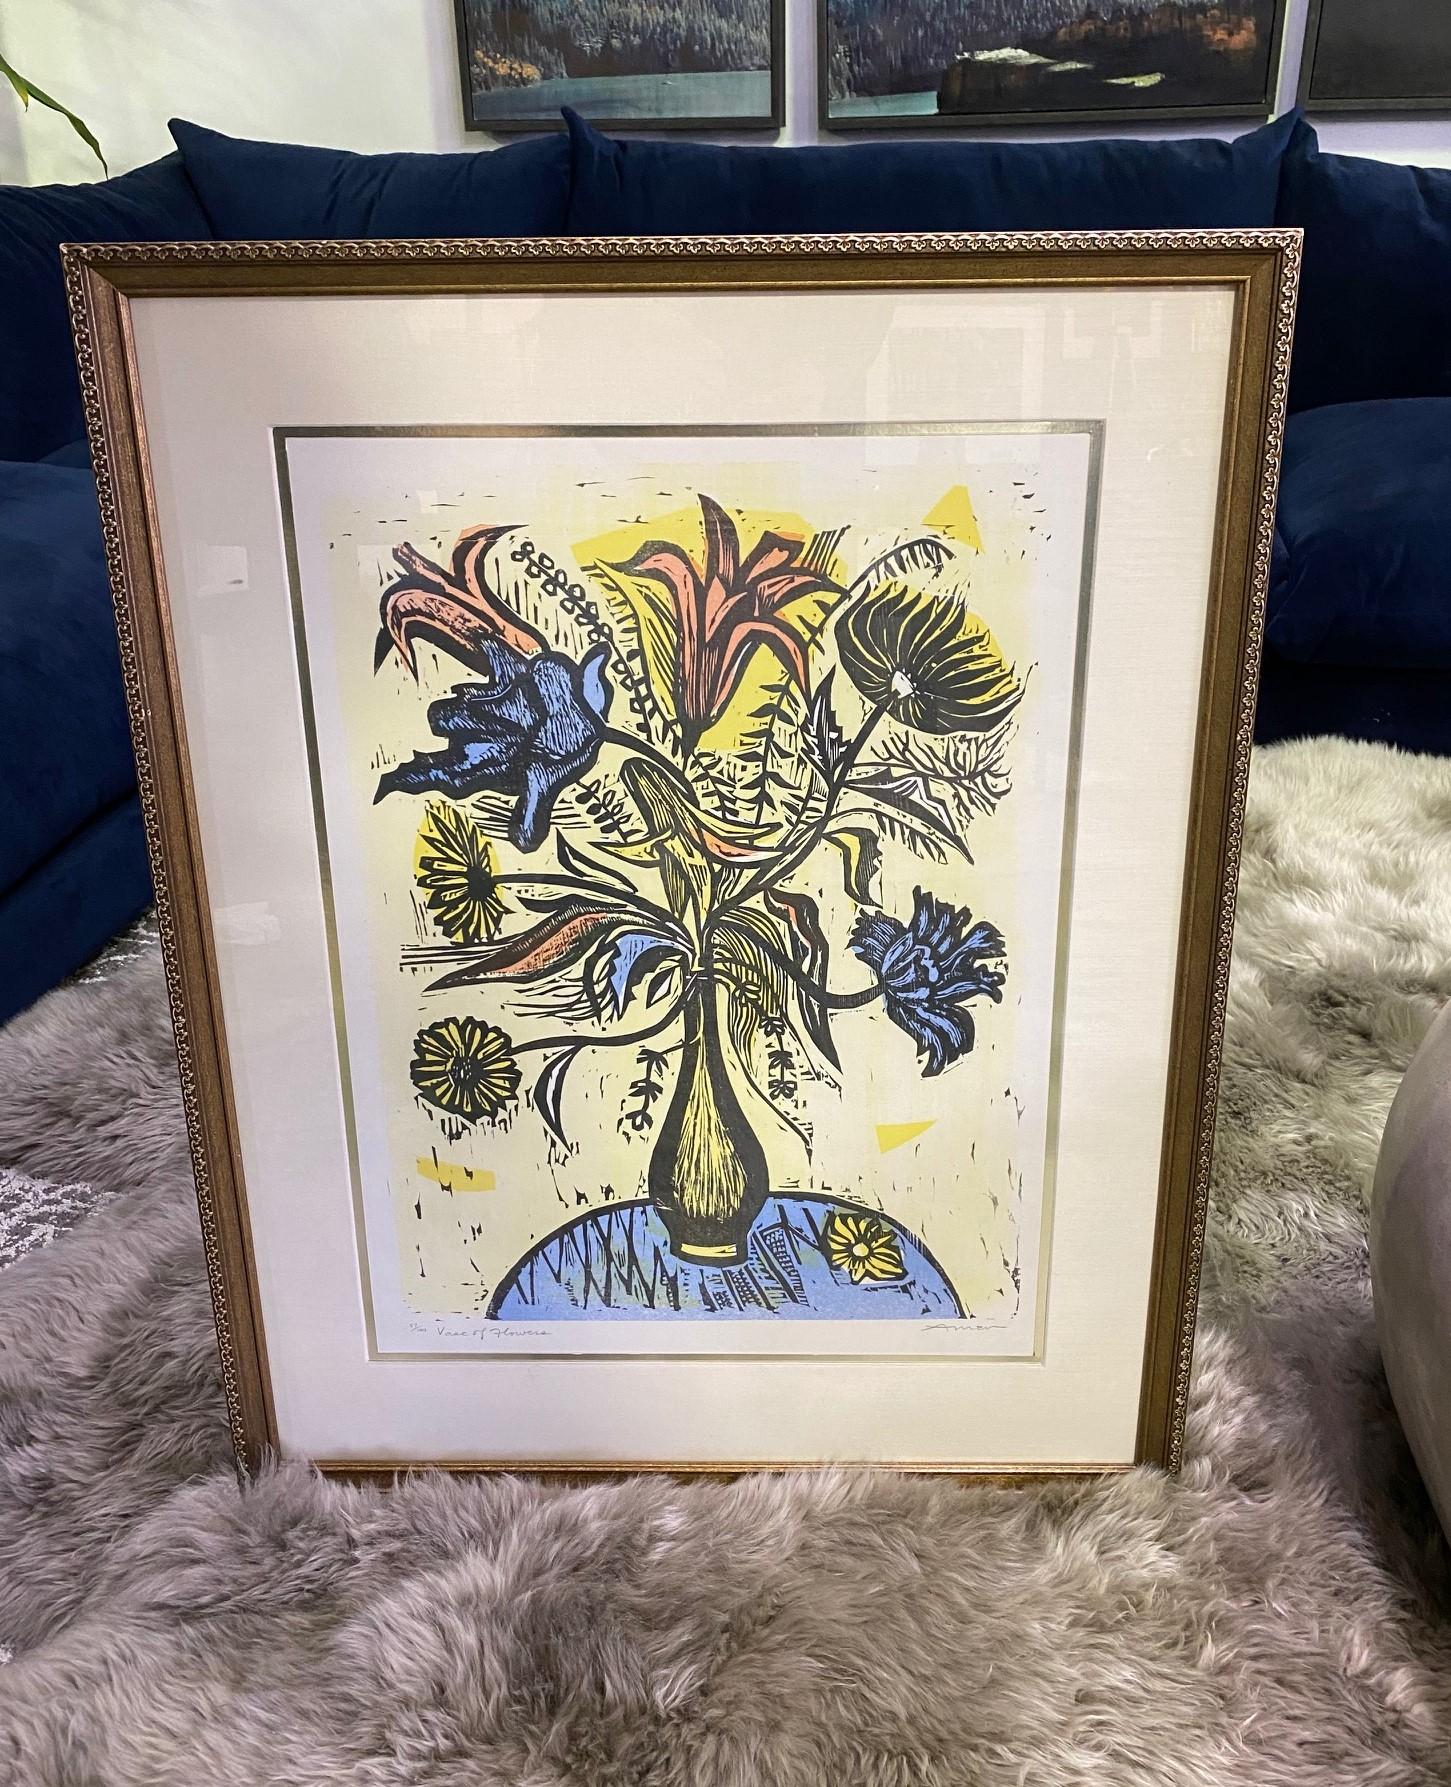 A wonderfully designed and richly colored woodcut image by New York City/ American born Jewish artist Irving Amen. This image appears to be an homage to the work of French artist Bernard Buffett. 

Pencil signed, titled (Vase of Flowers), and